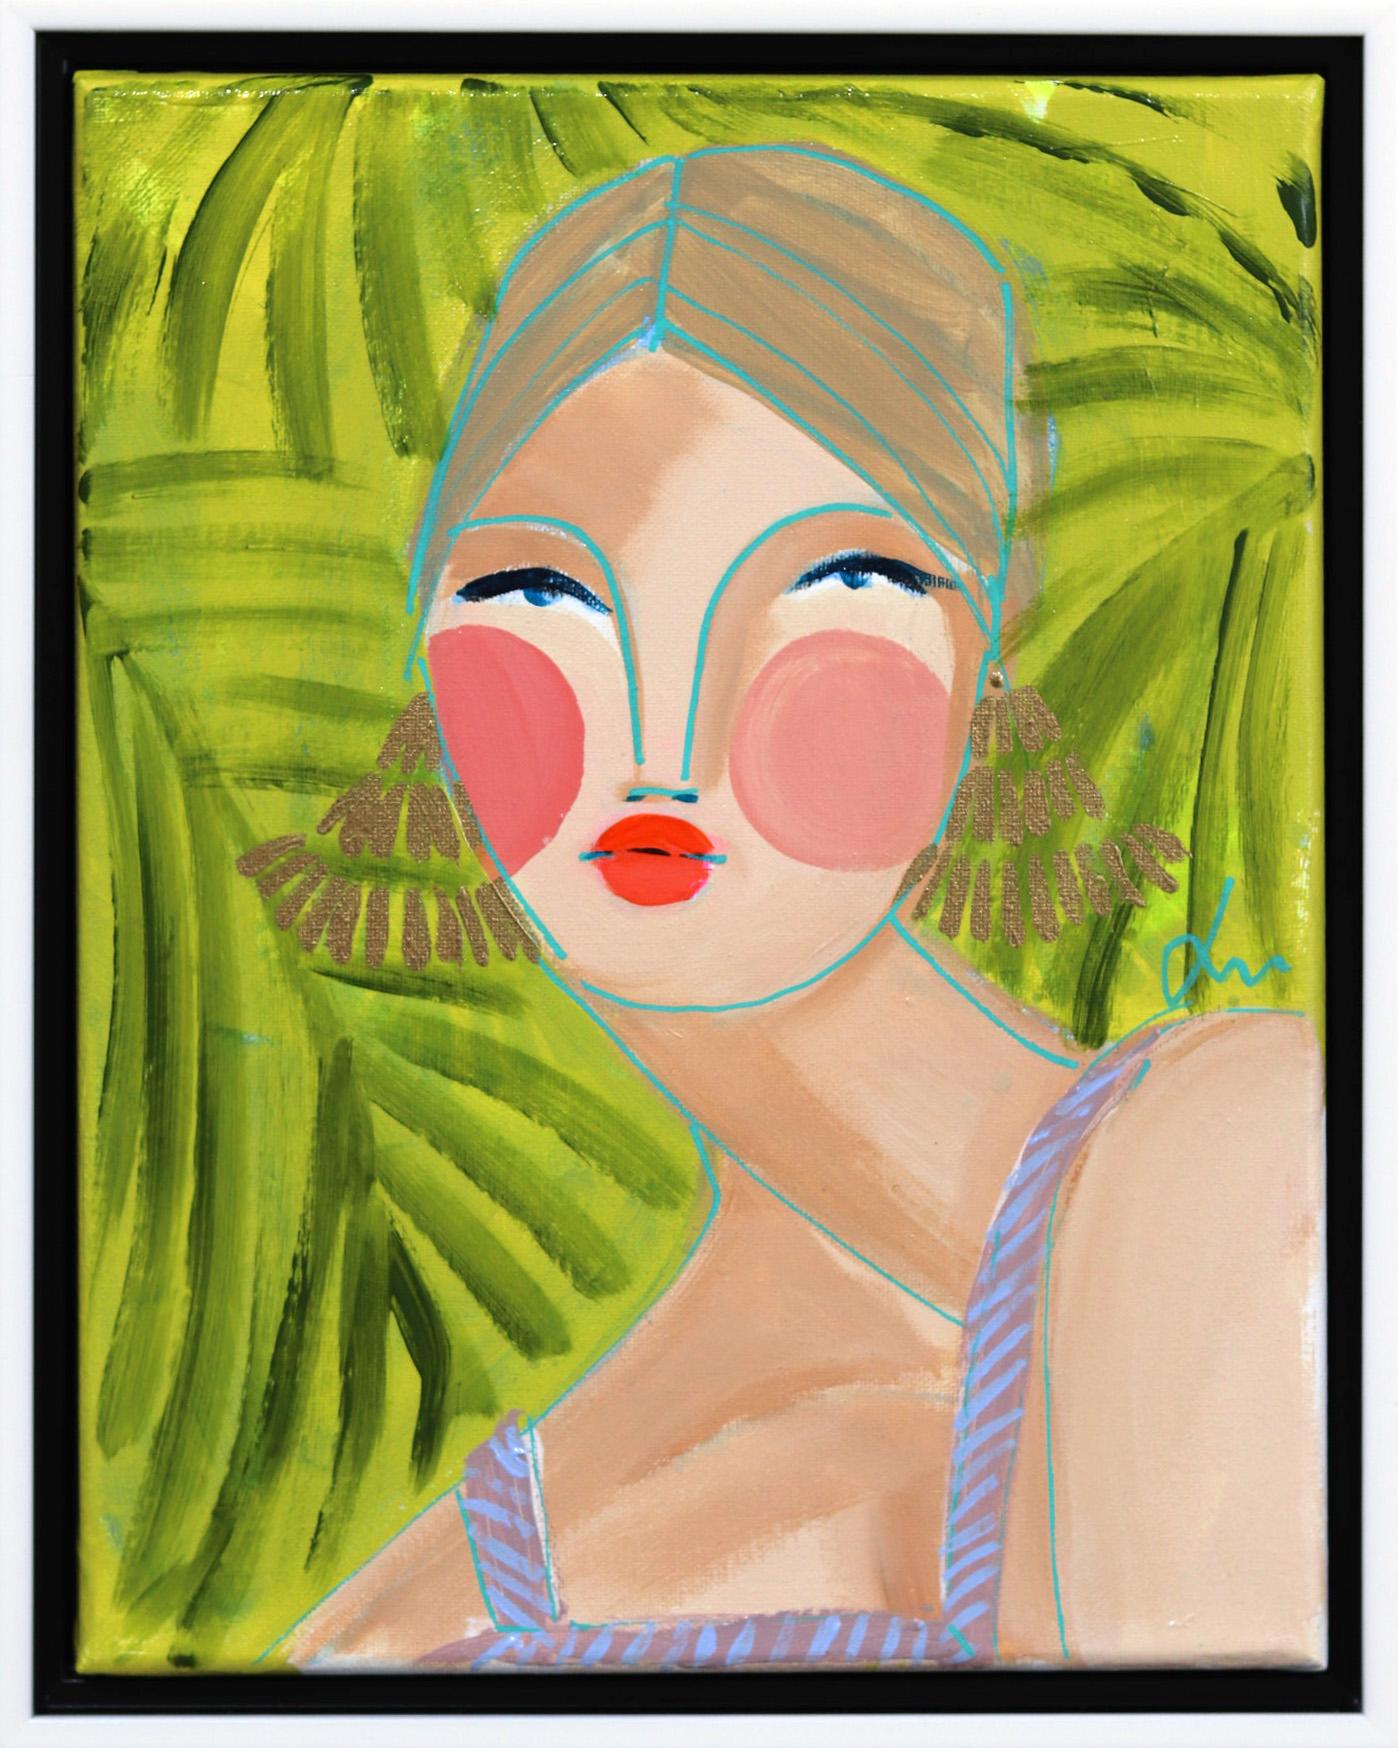 Miss Priss Palms 1 - Colorful Abstract Figurative Portrait Original Painting